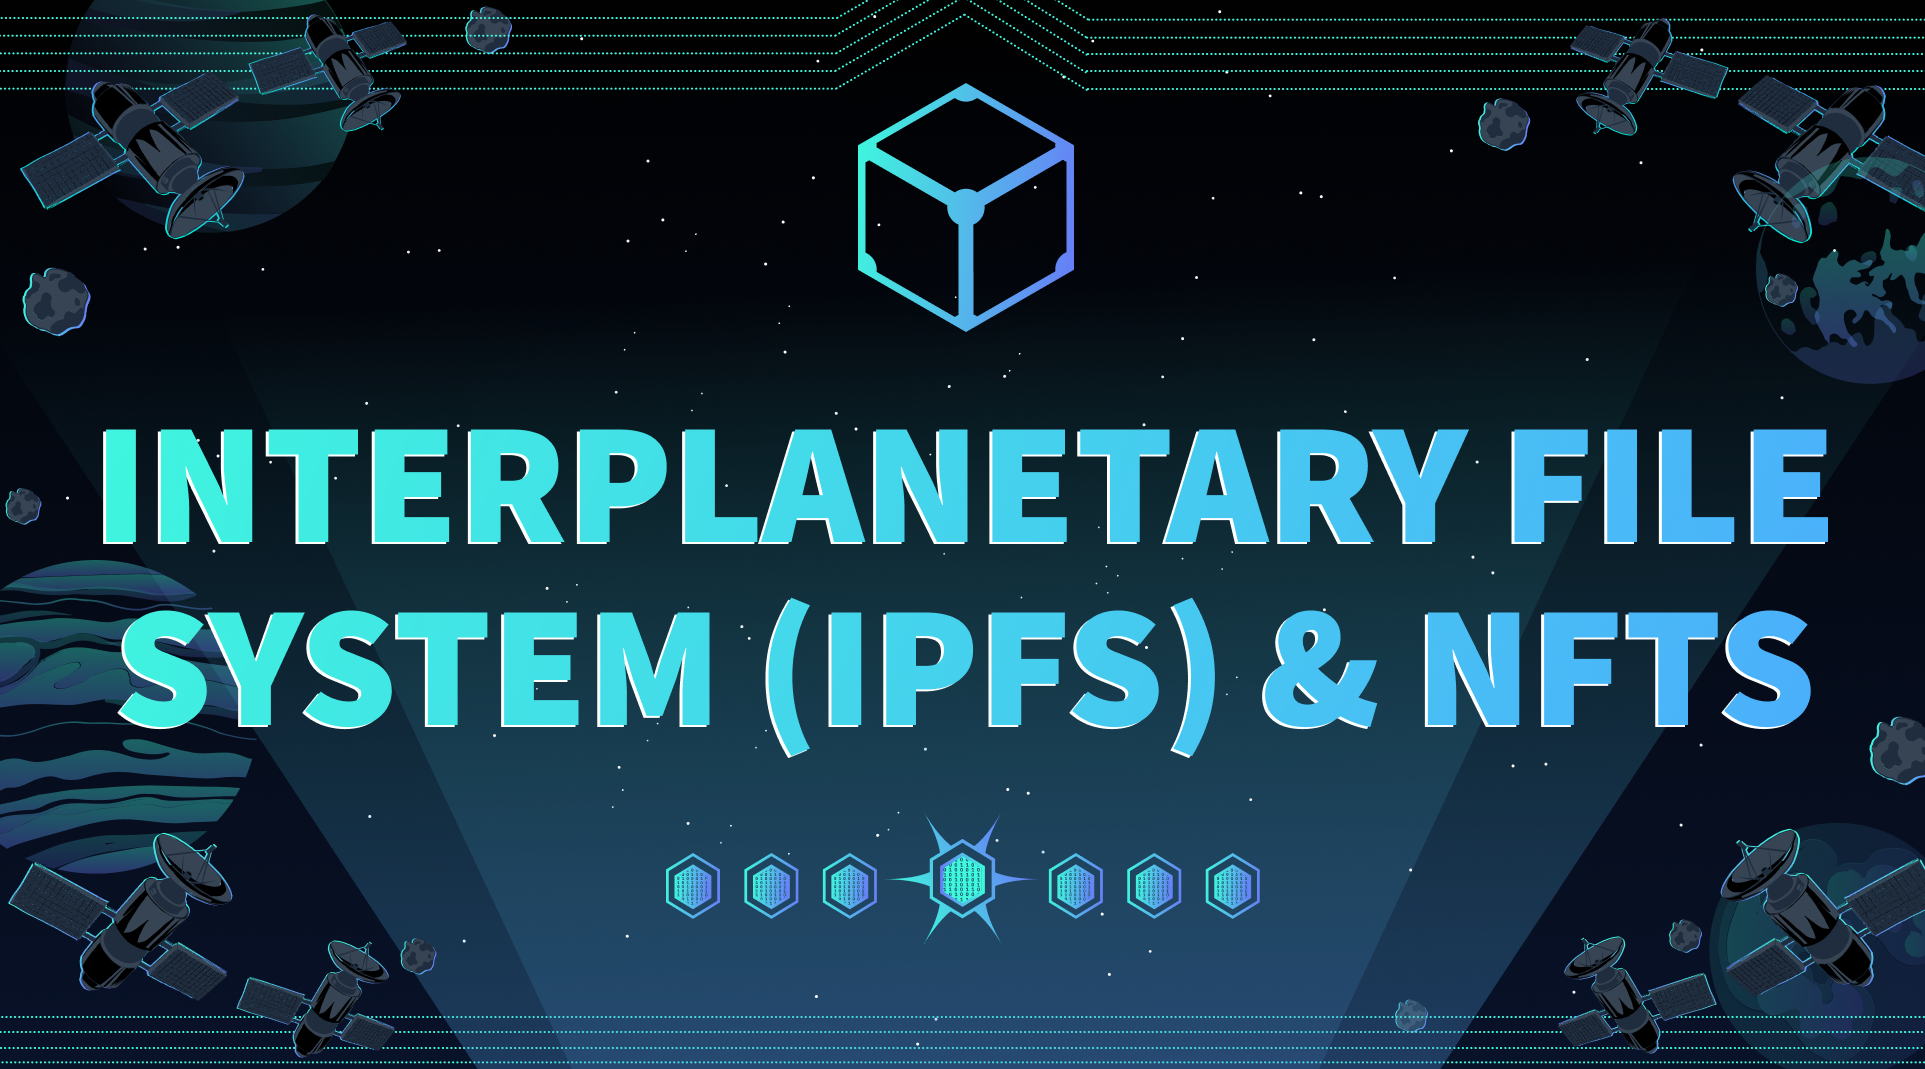 Interplanetary File System (IPFS) and NFTs